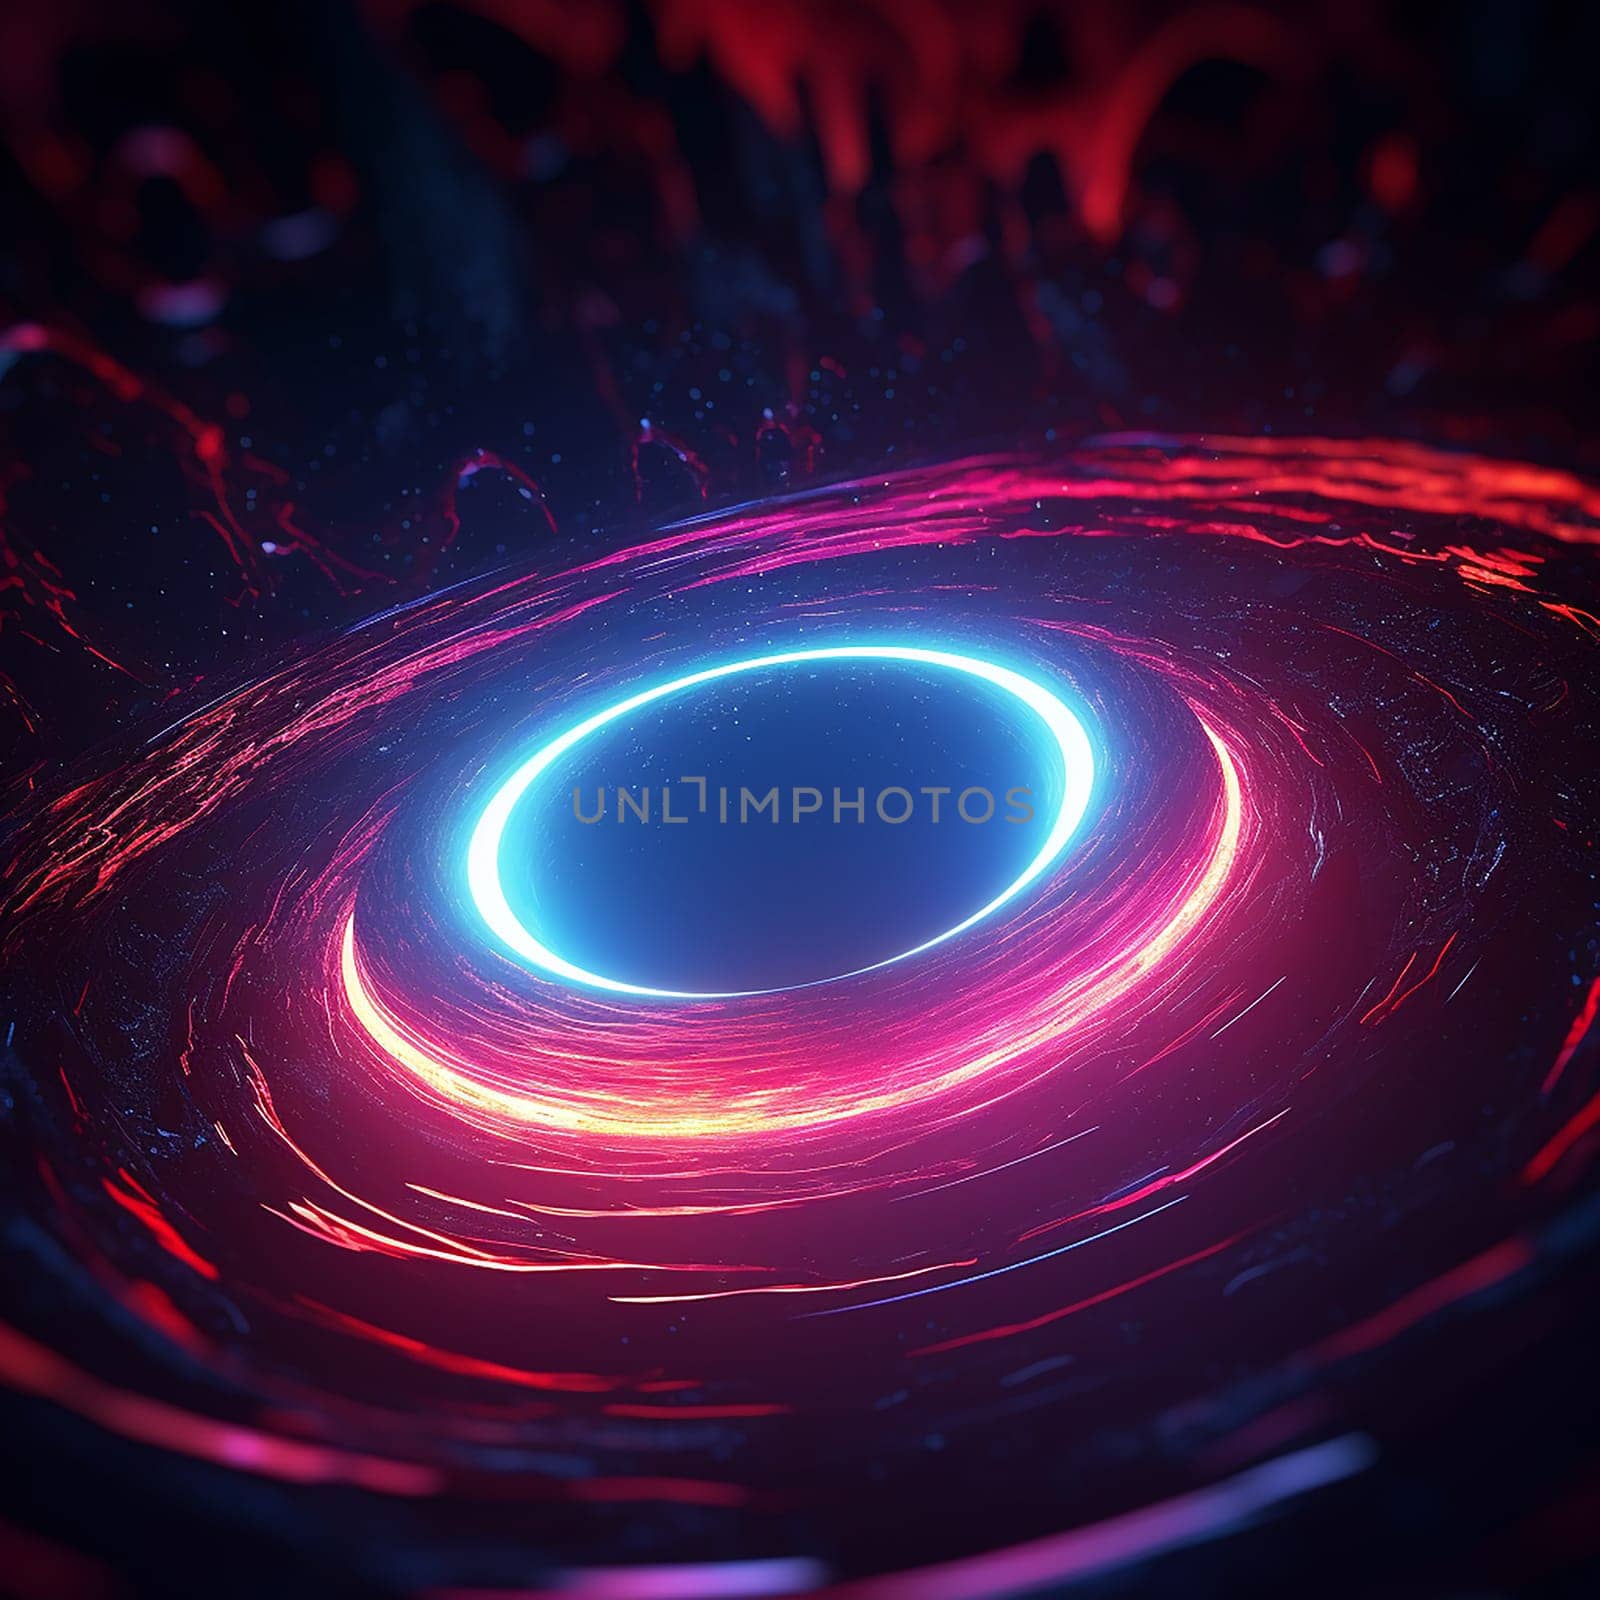 Abstract image of a black hole or portal with swirling red and blue neon lights by Hype2art